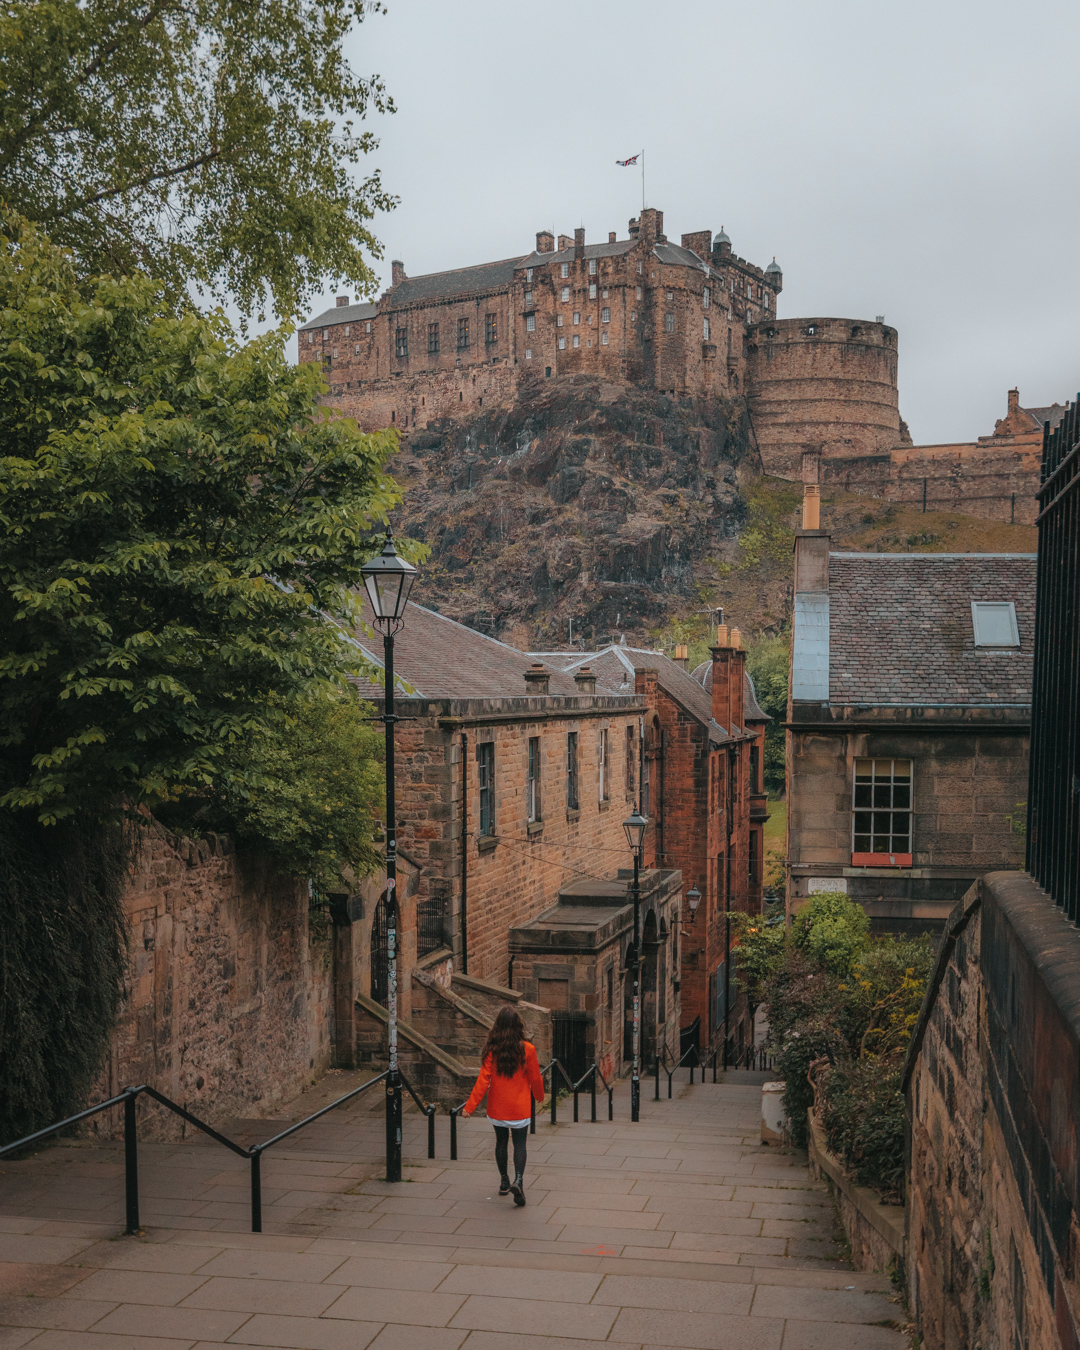 Girl in bright red jacket standing at the top of steps with a view of an ancient castle on a hill in the background - The Vennel in Edinburgh, Scotland